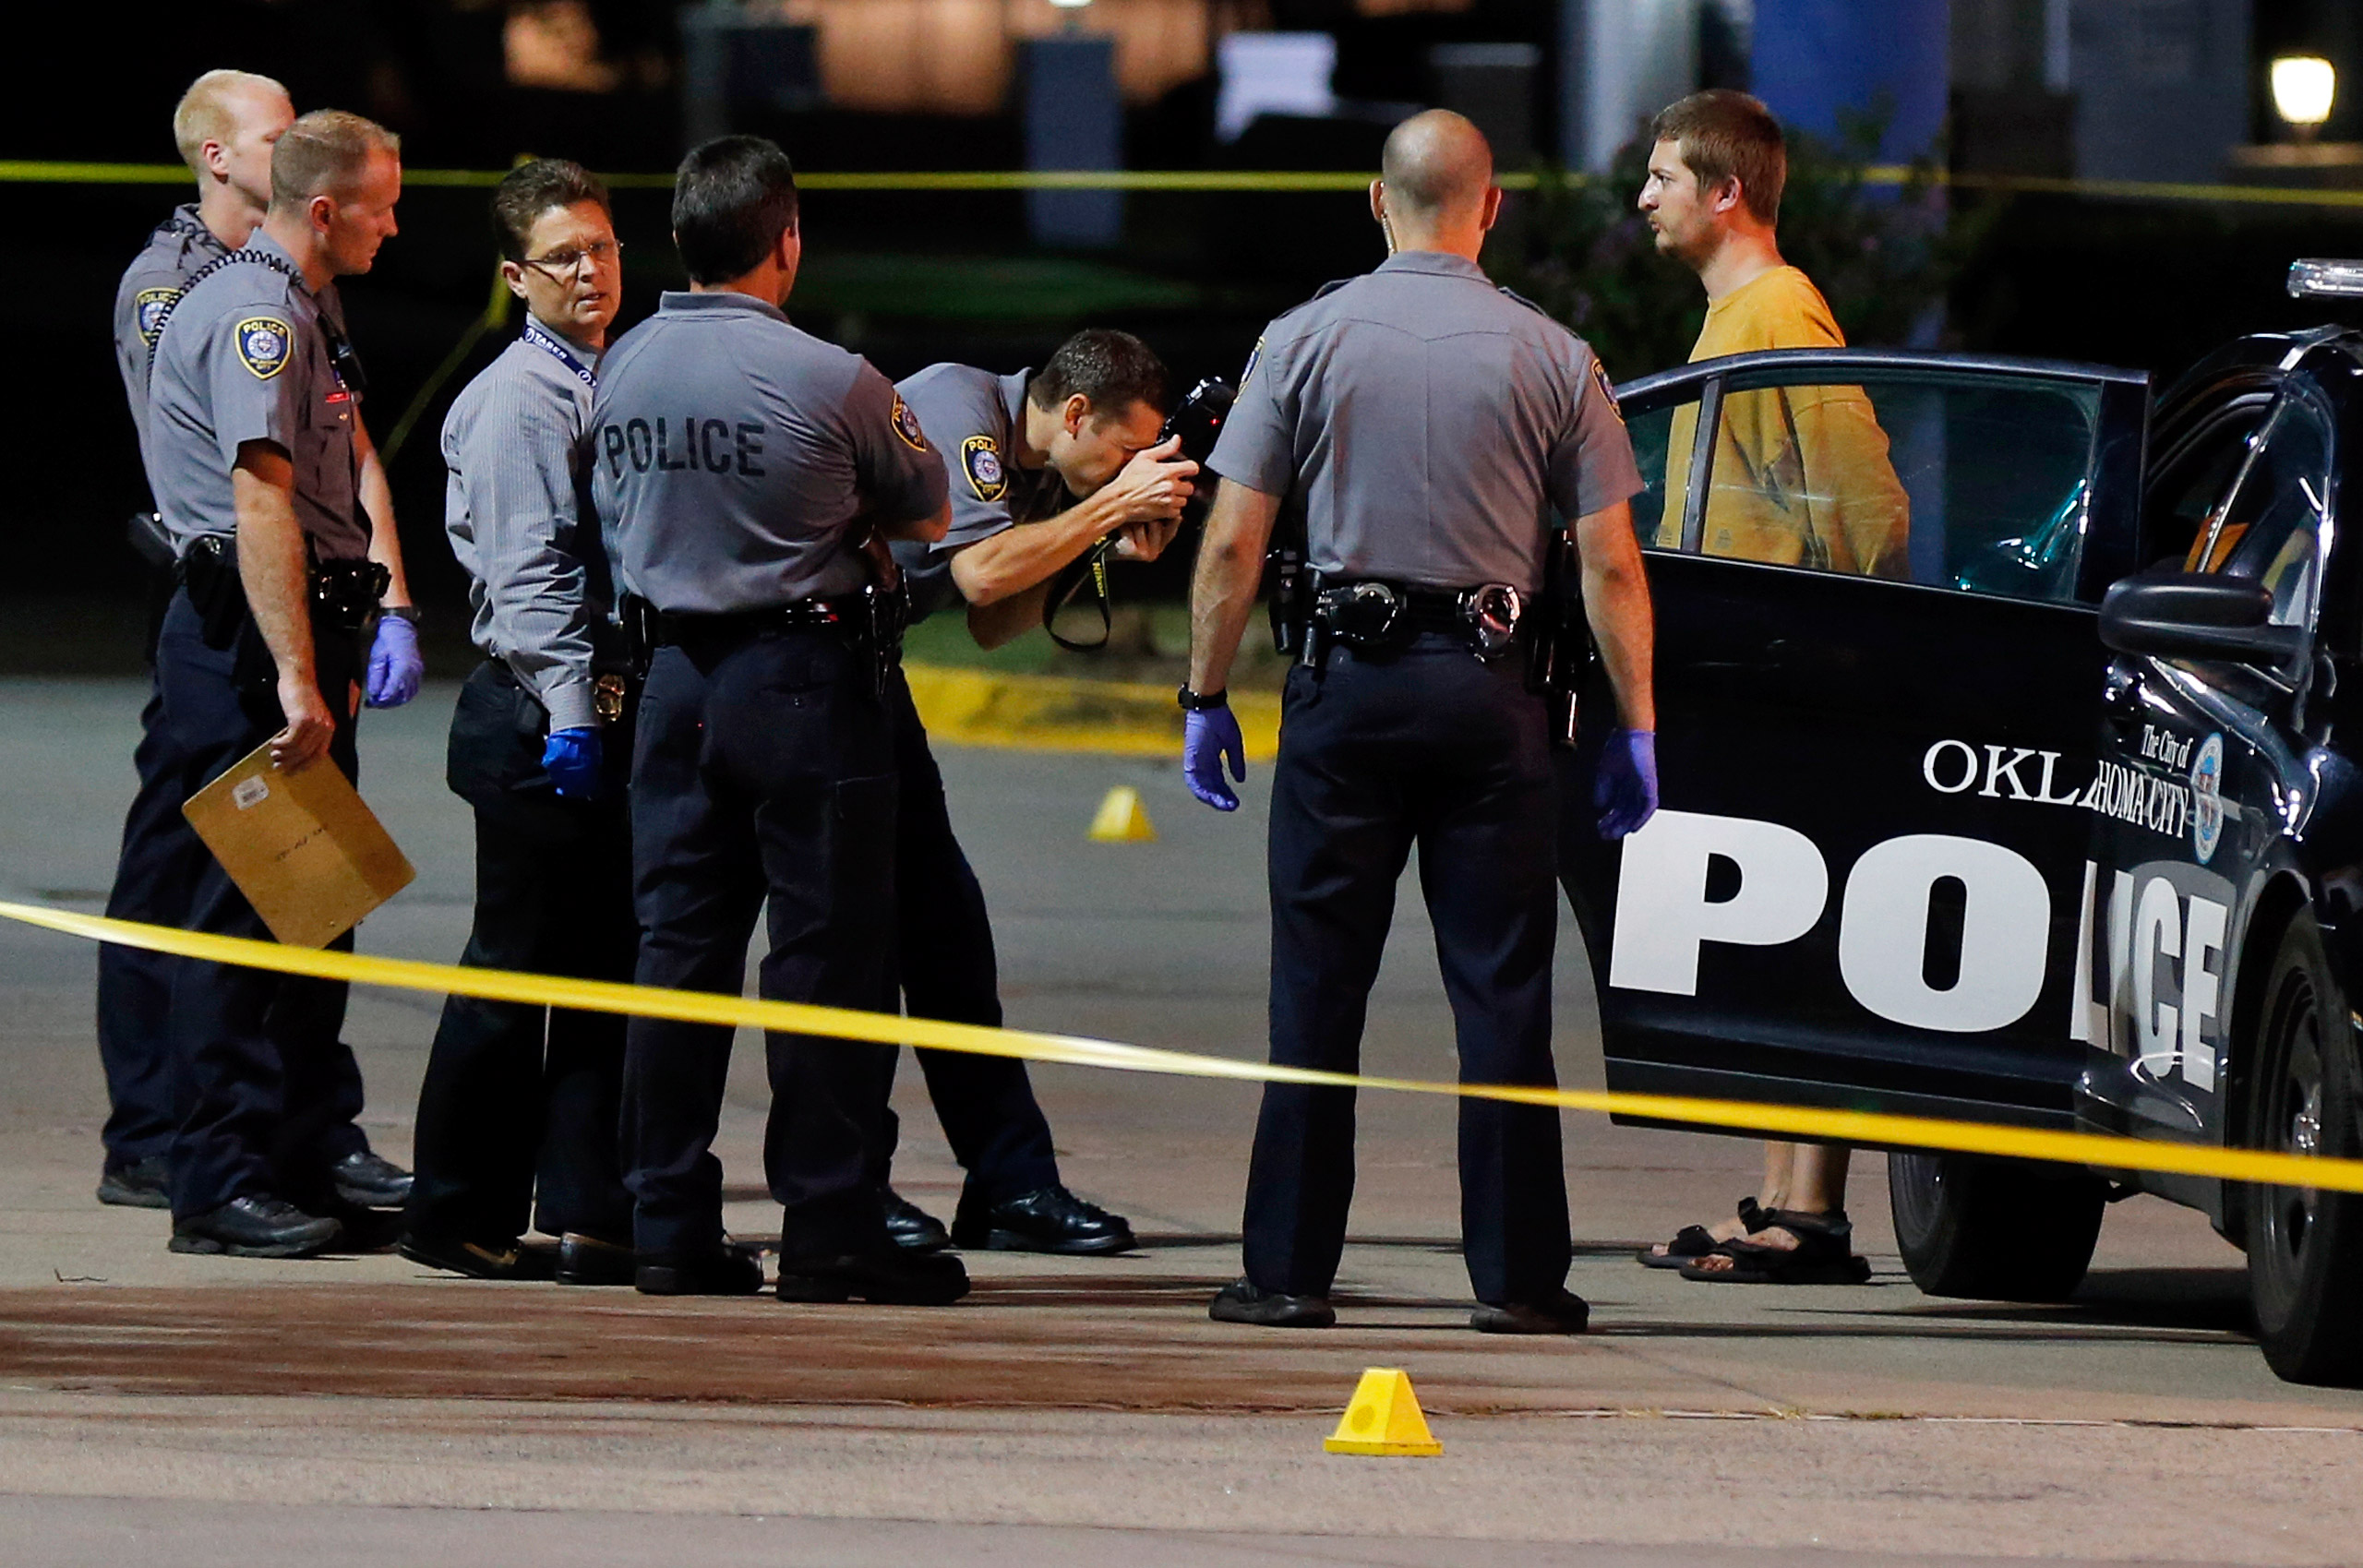 Police arresting Christian Costello, son of Oklahoma Labor Commissioner Mark Costello, on a first-degree murder complaint for fatally stabbing his father at a restaurant in Oklahoma City, on Aug. 23, 2015. (Nate Billings—The Oklahoman/AP)